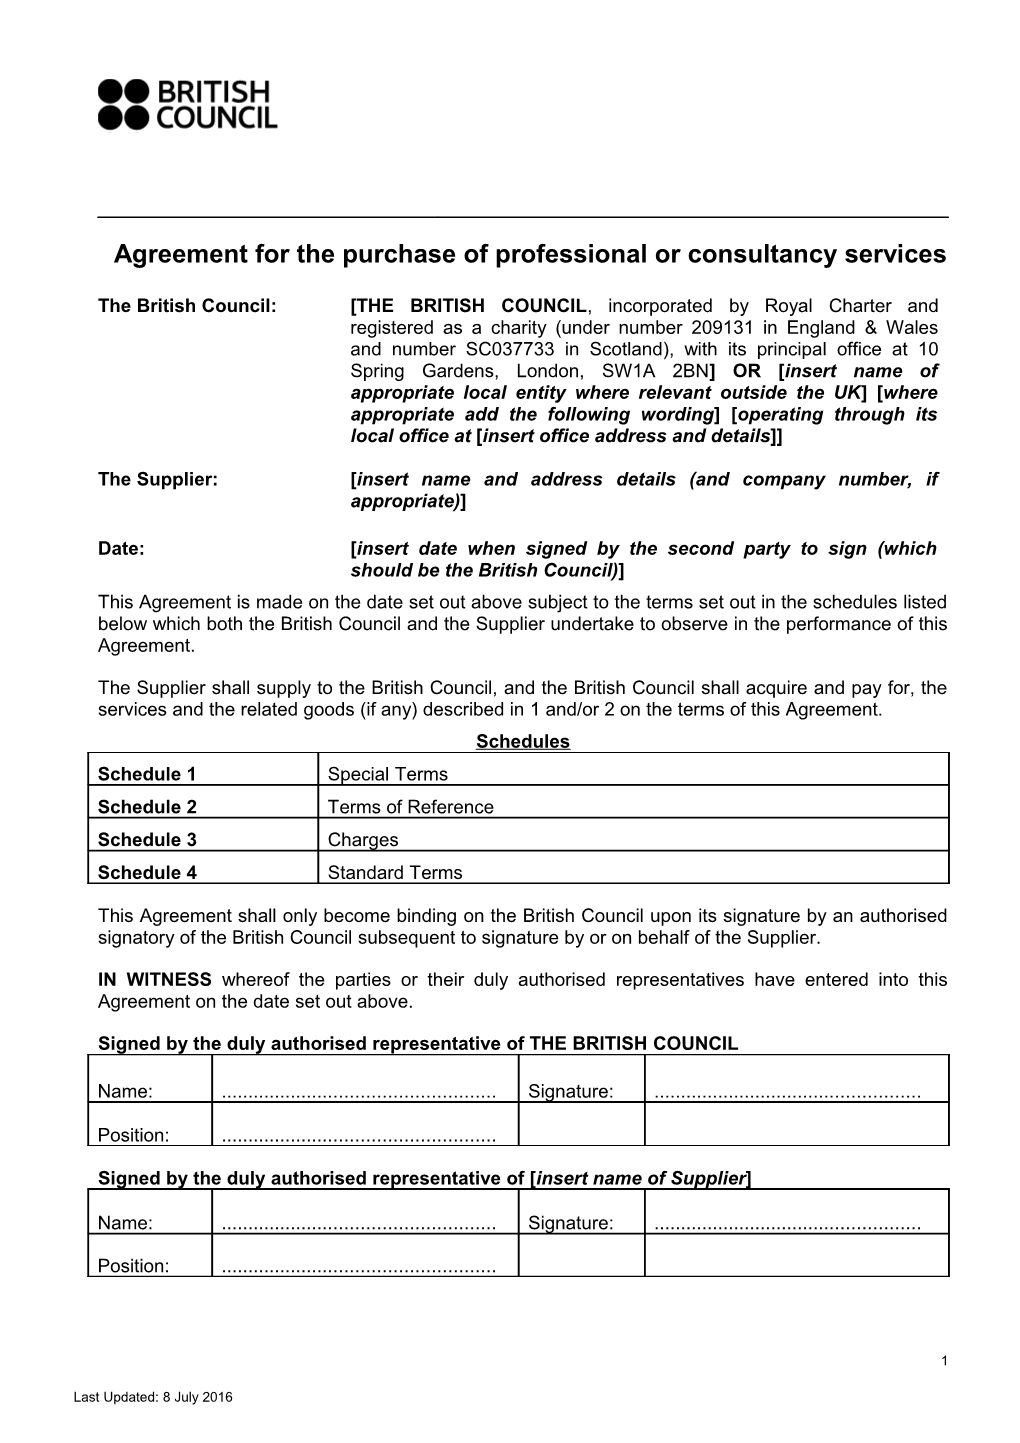 Agreement for the Purchase of Professional Or Consultancy Services